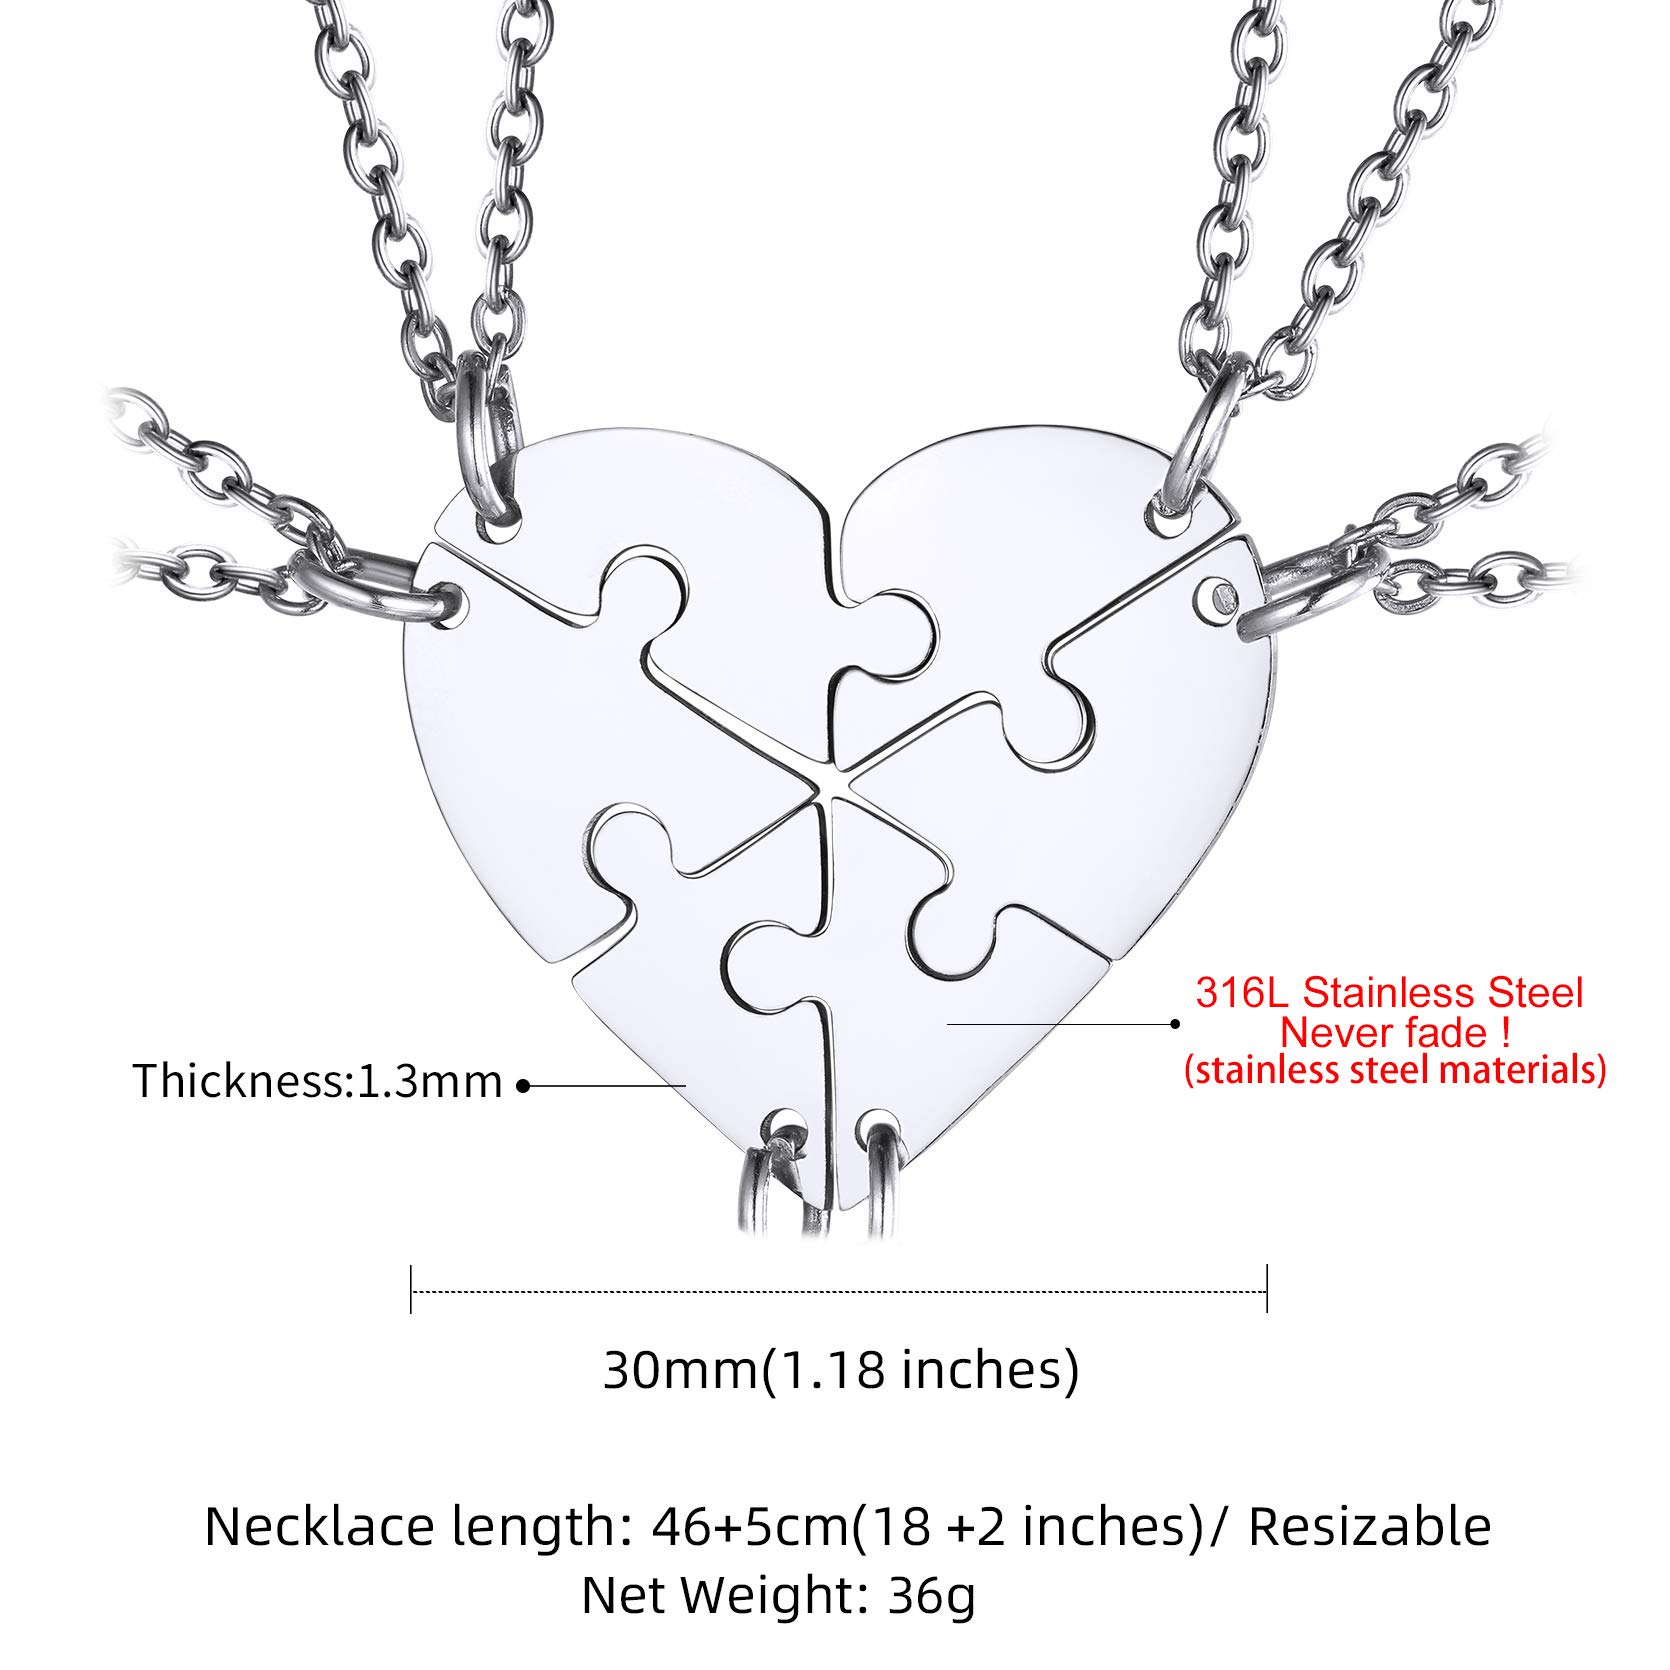 GOLDCHIC JEWELRY Yin Yang Pendant Friendship Necklaces For Men Women, Stainless Steel Customized Puzzle Heart Matching Necklace for 2/3/4/5/6